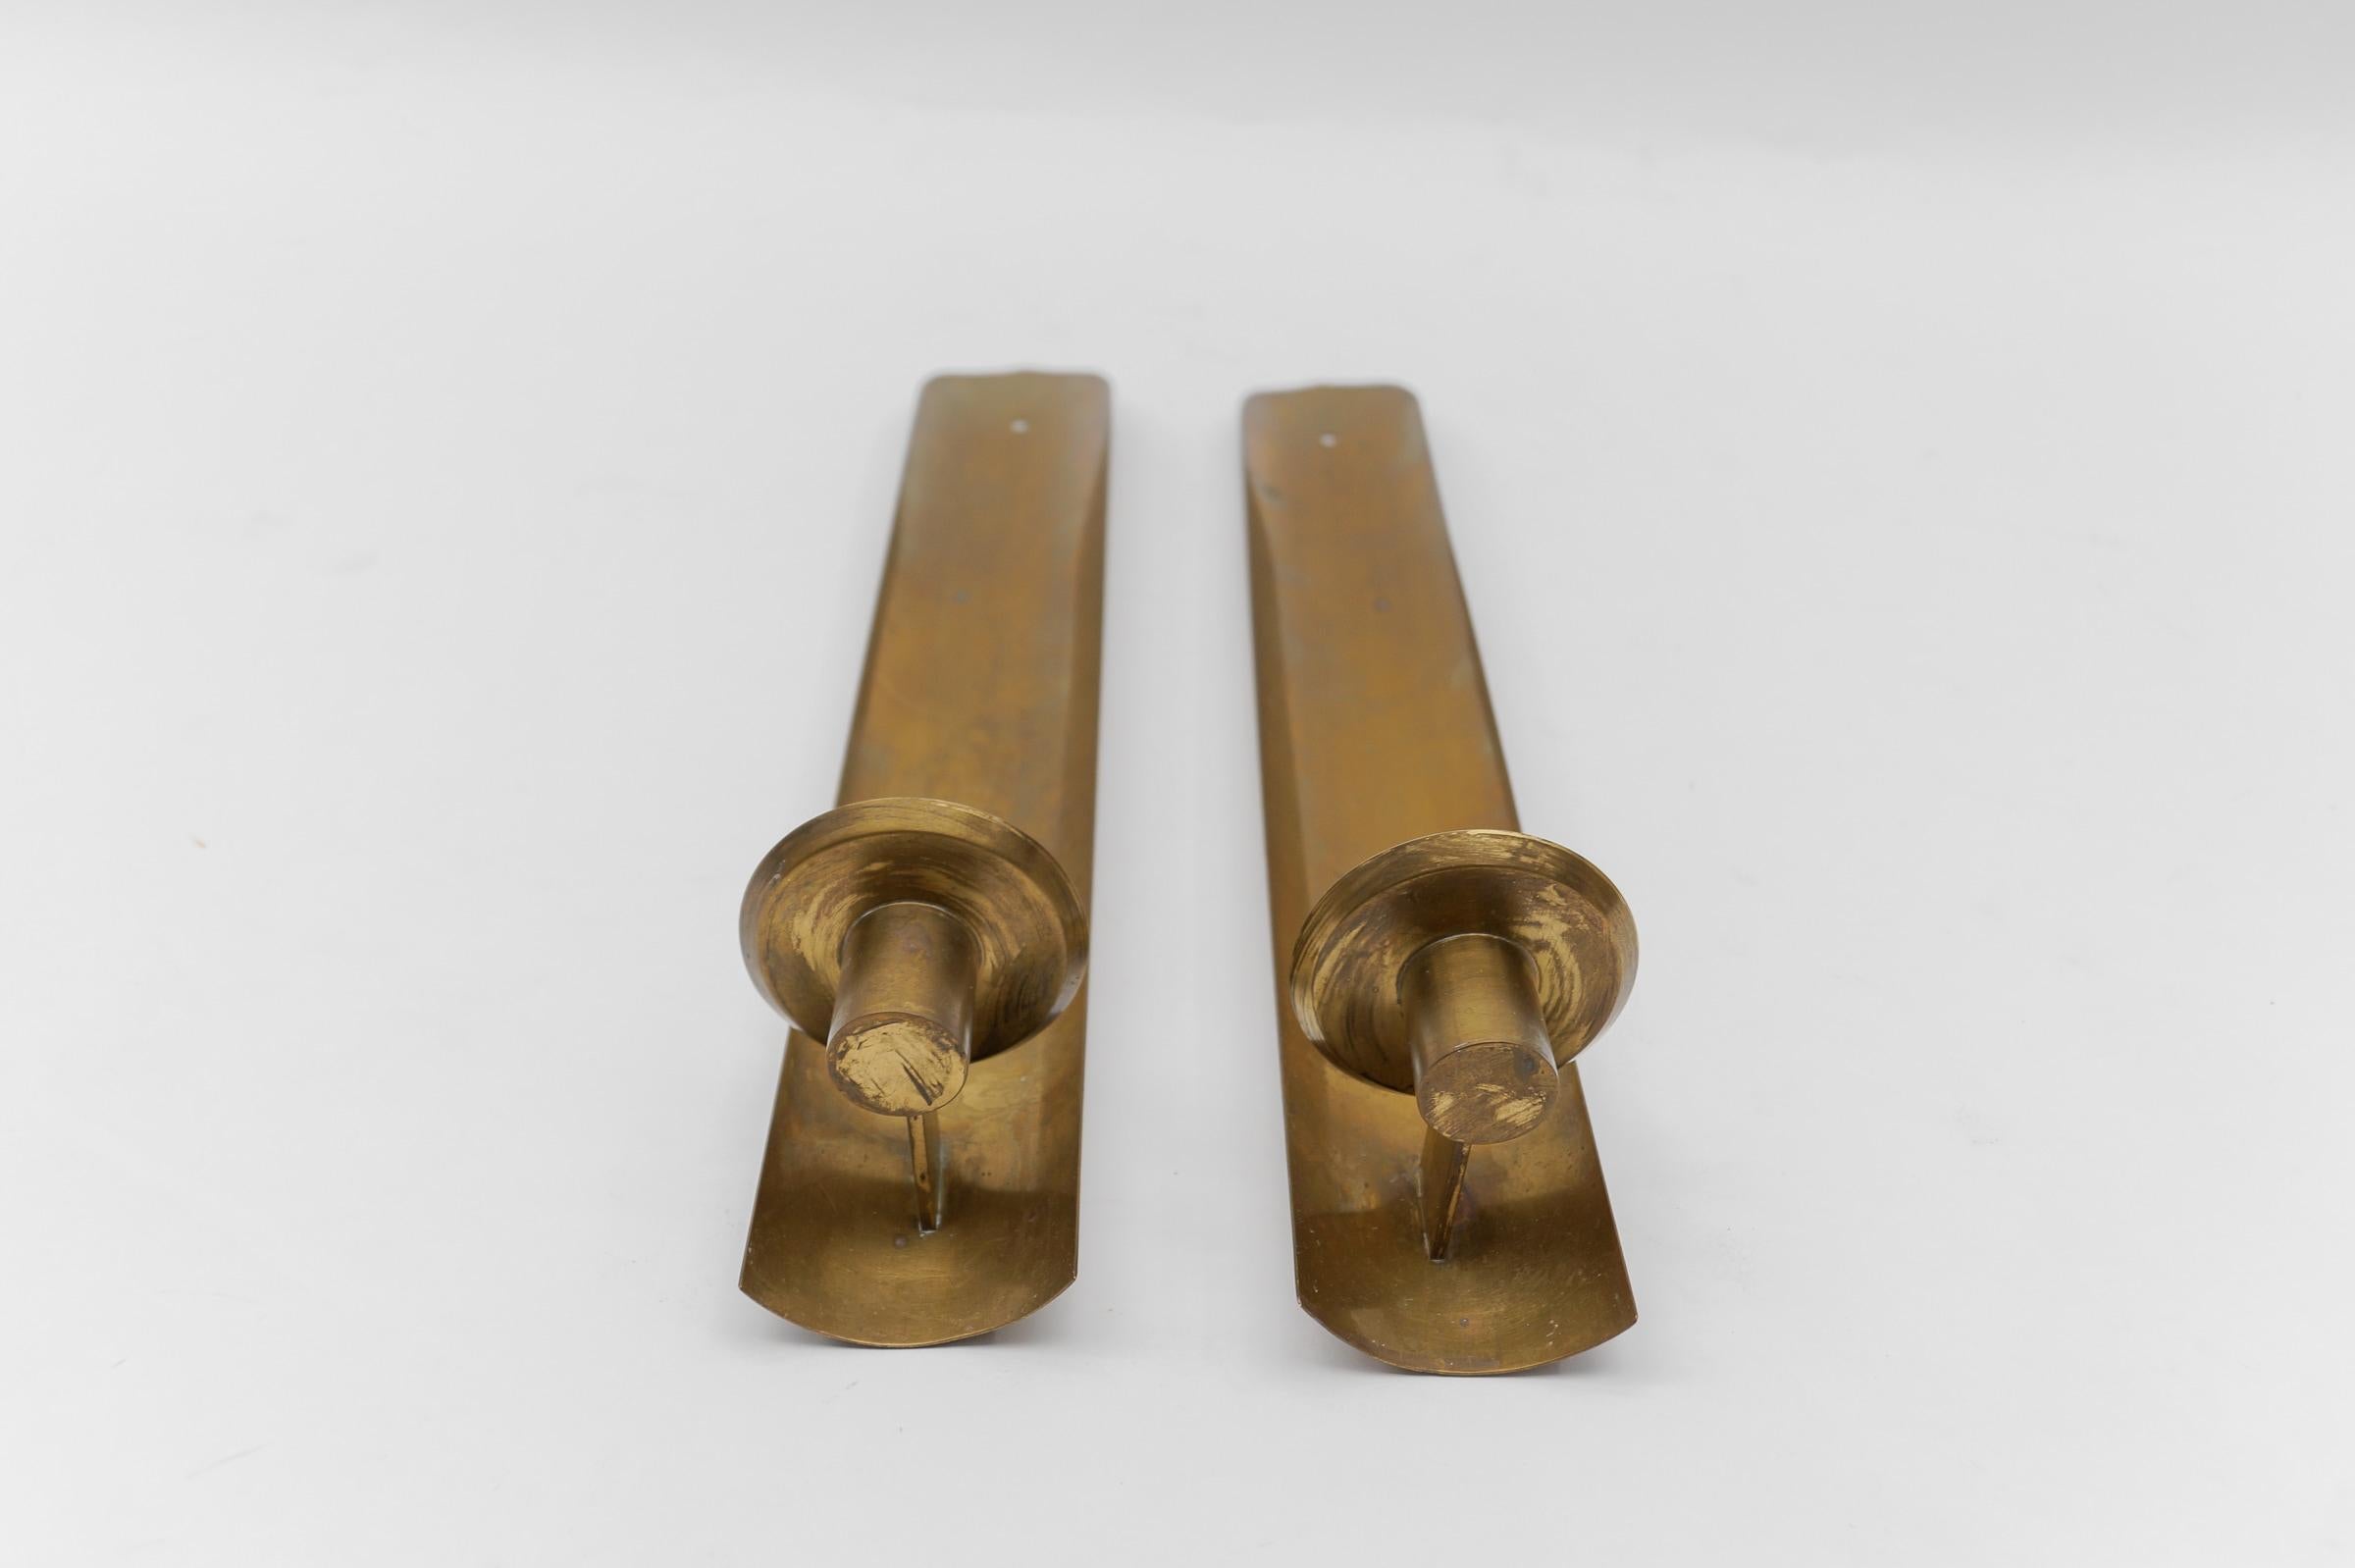 Awesome Pair of Brass Wall Candle Holder, 1950s Austria In Good Condition For Sale In Nürnberg, Bayern